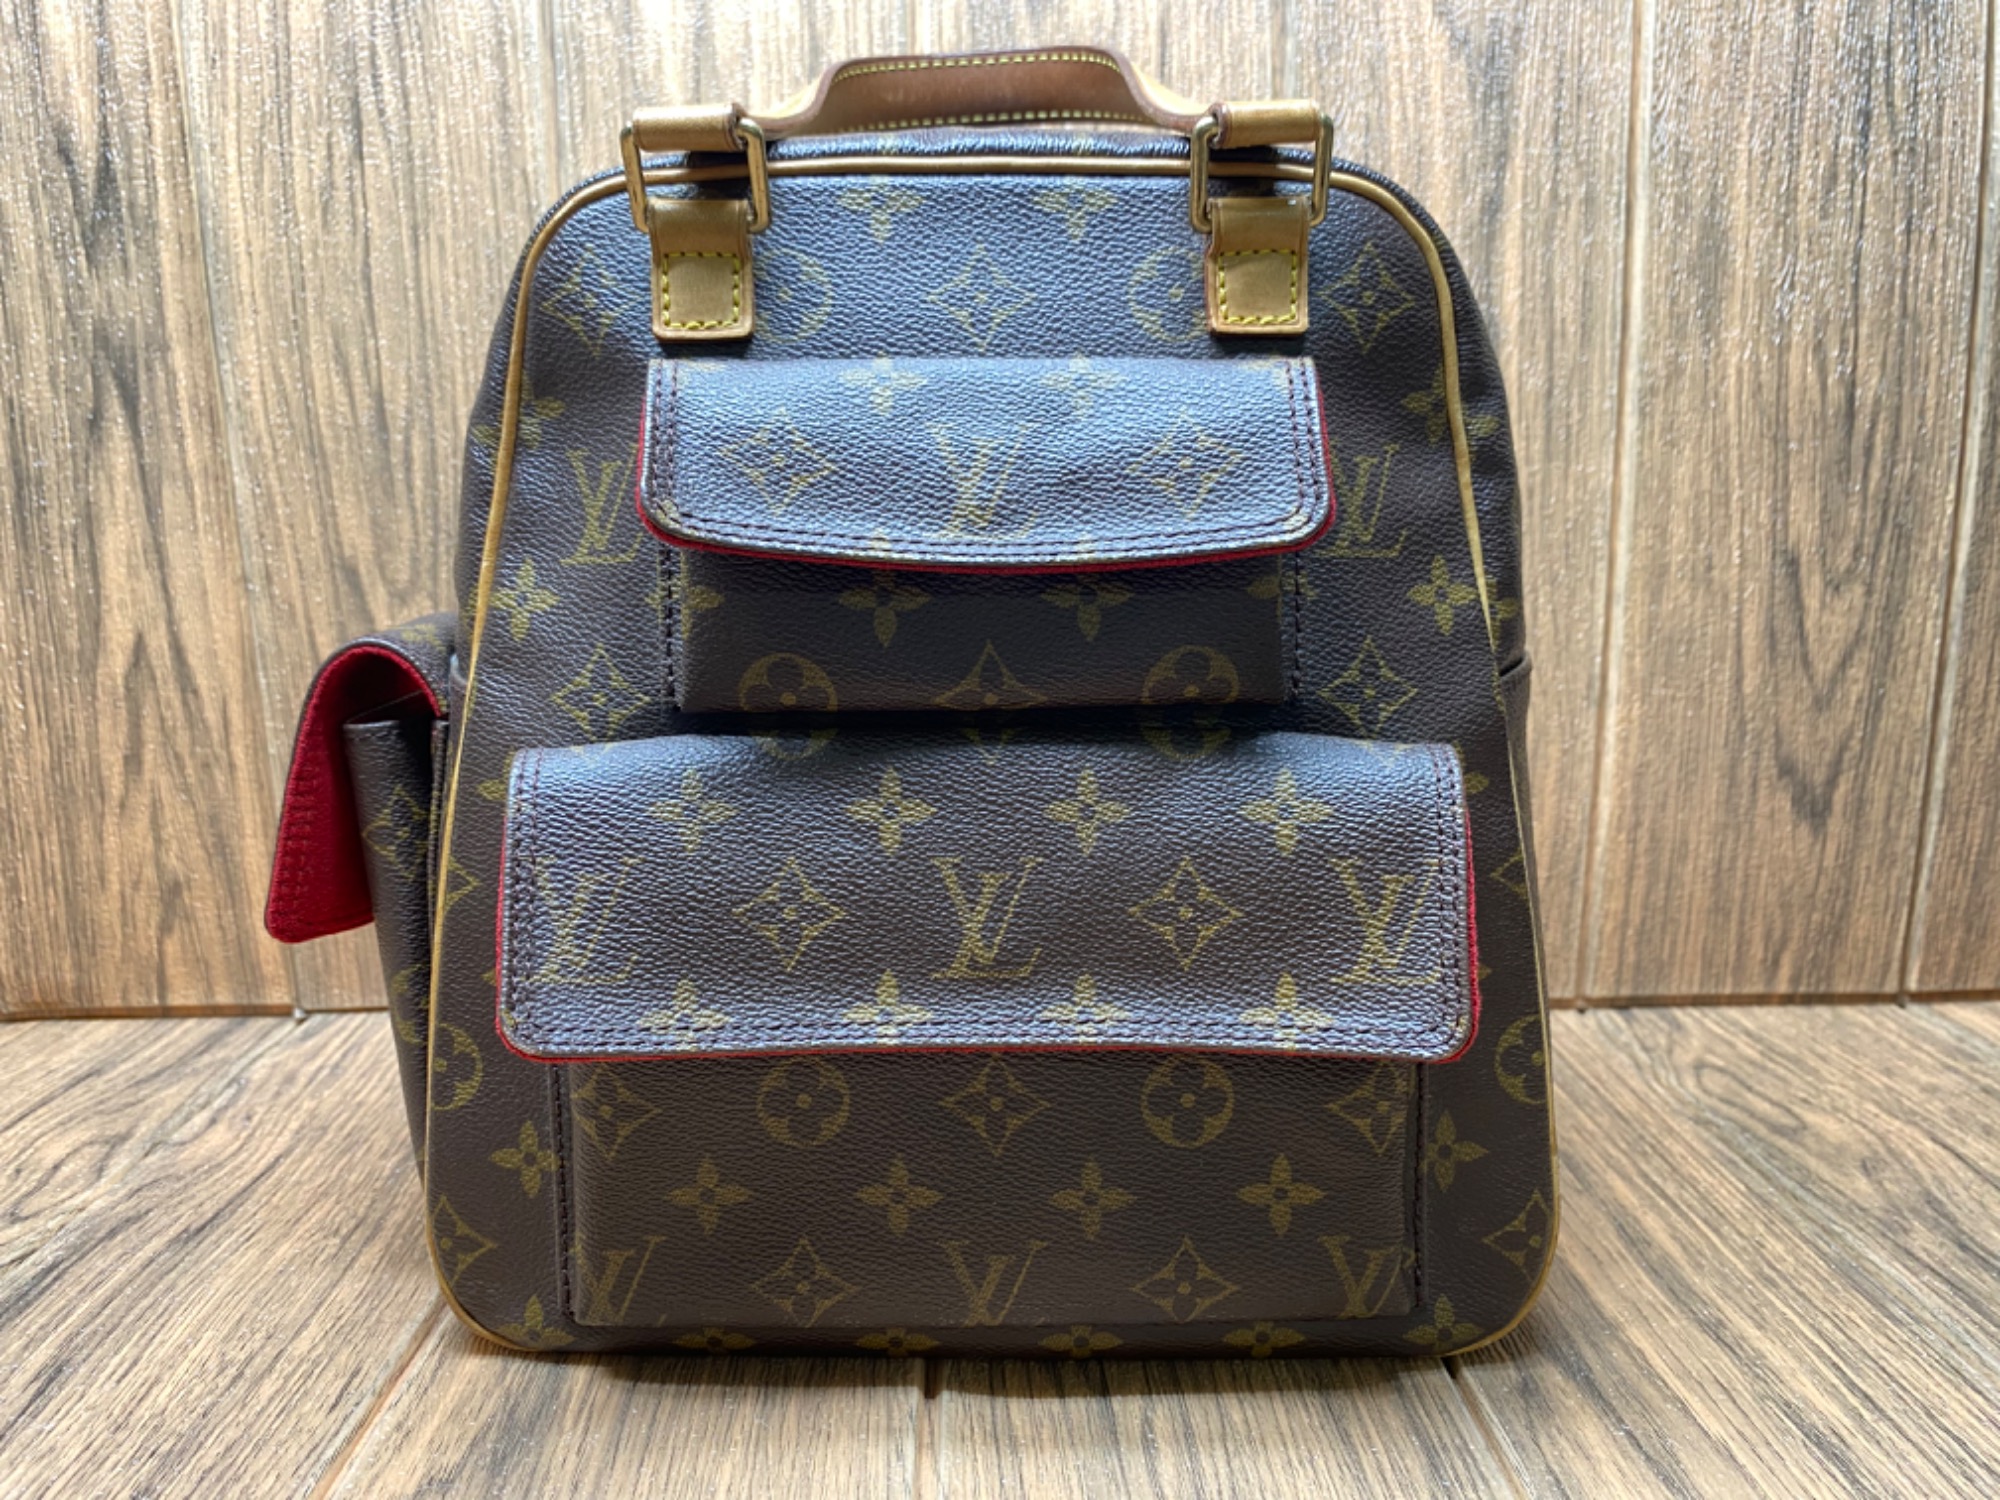 LOUIS VUITTON（ルイヴィトン) エクサントリシテ ハンドバッグ M51161